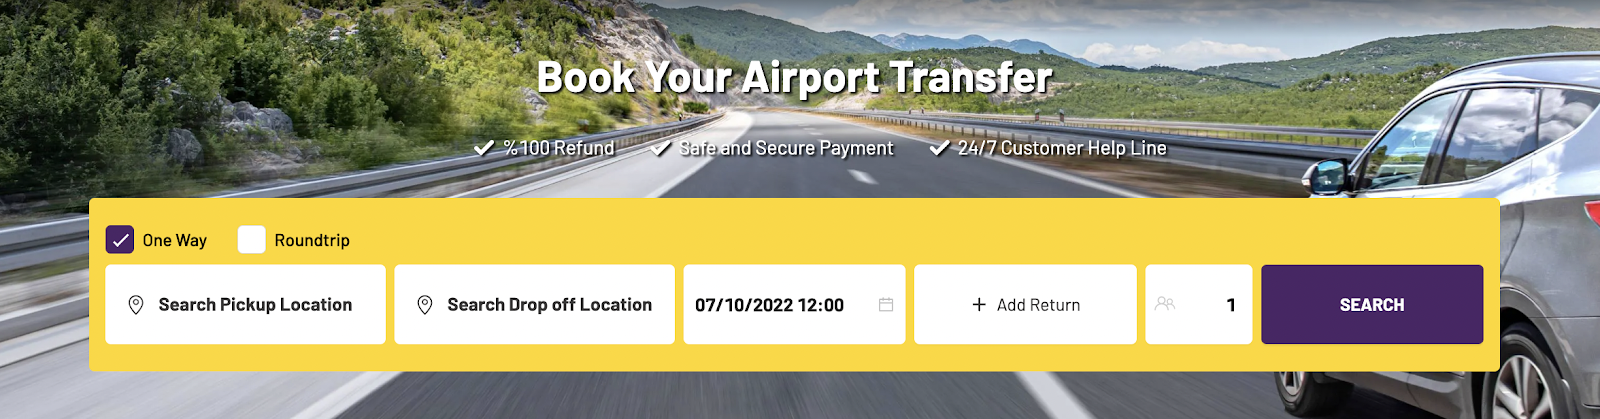 Airporttransfer review - Book your airport transfer anyhere in the world with Airporttransfer 3